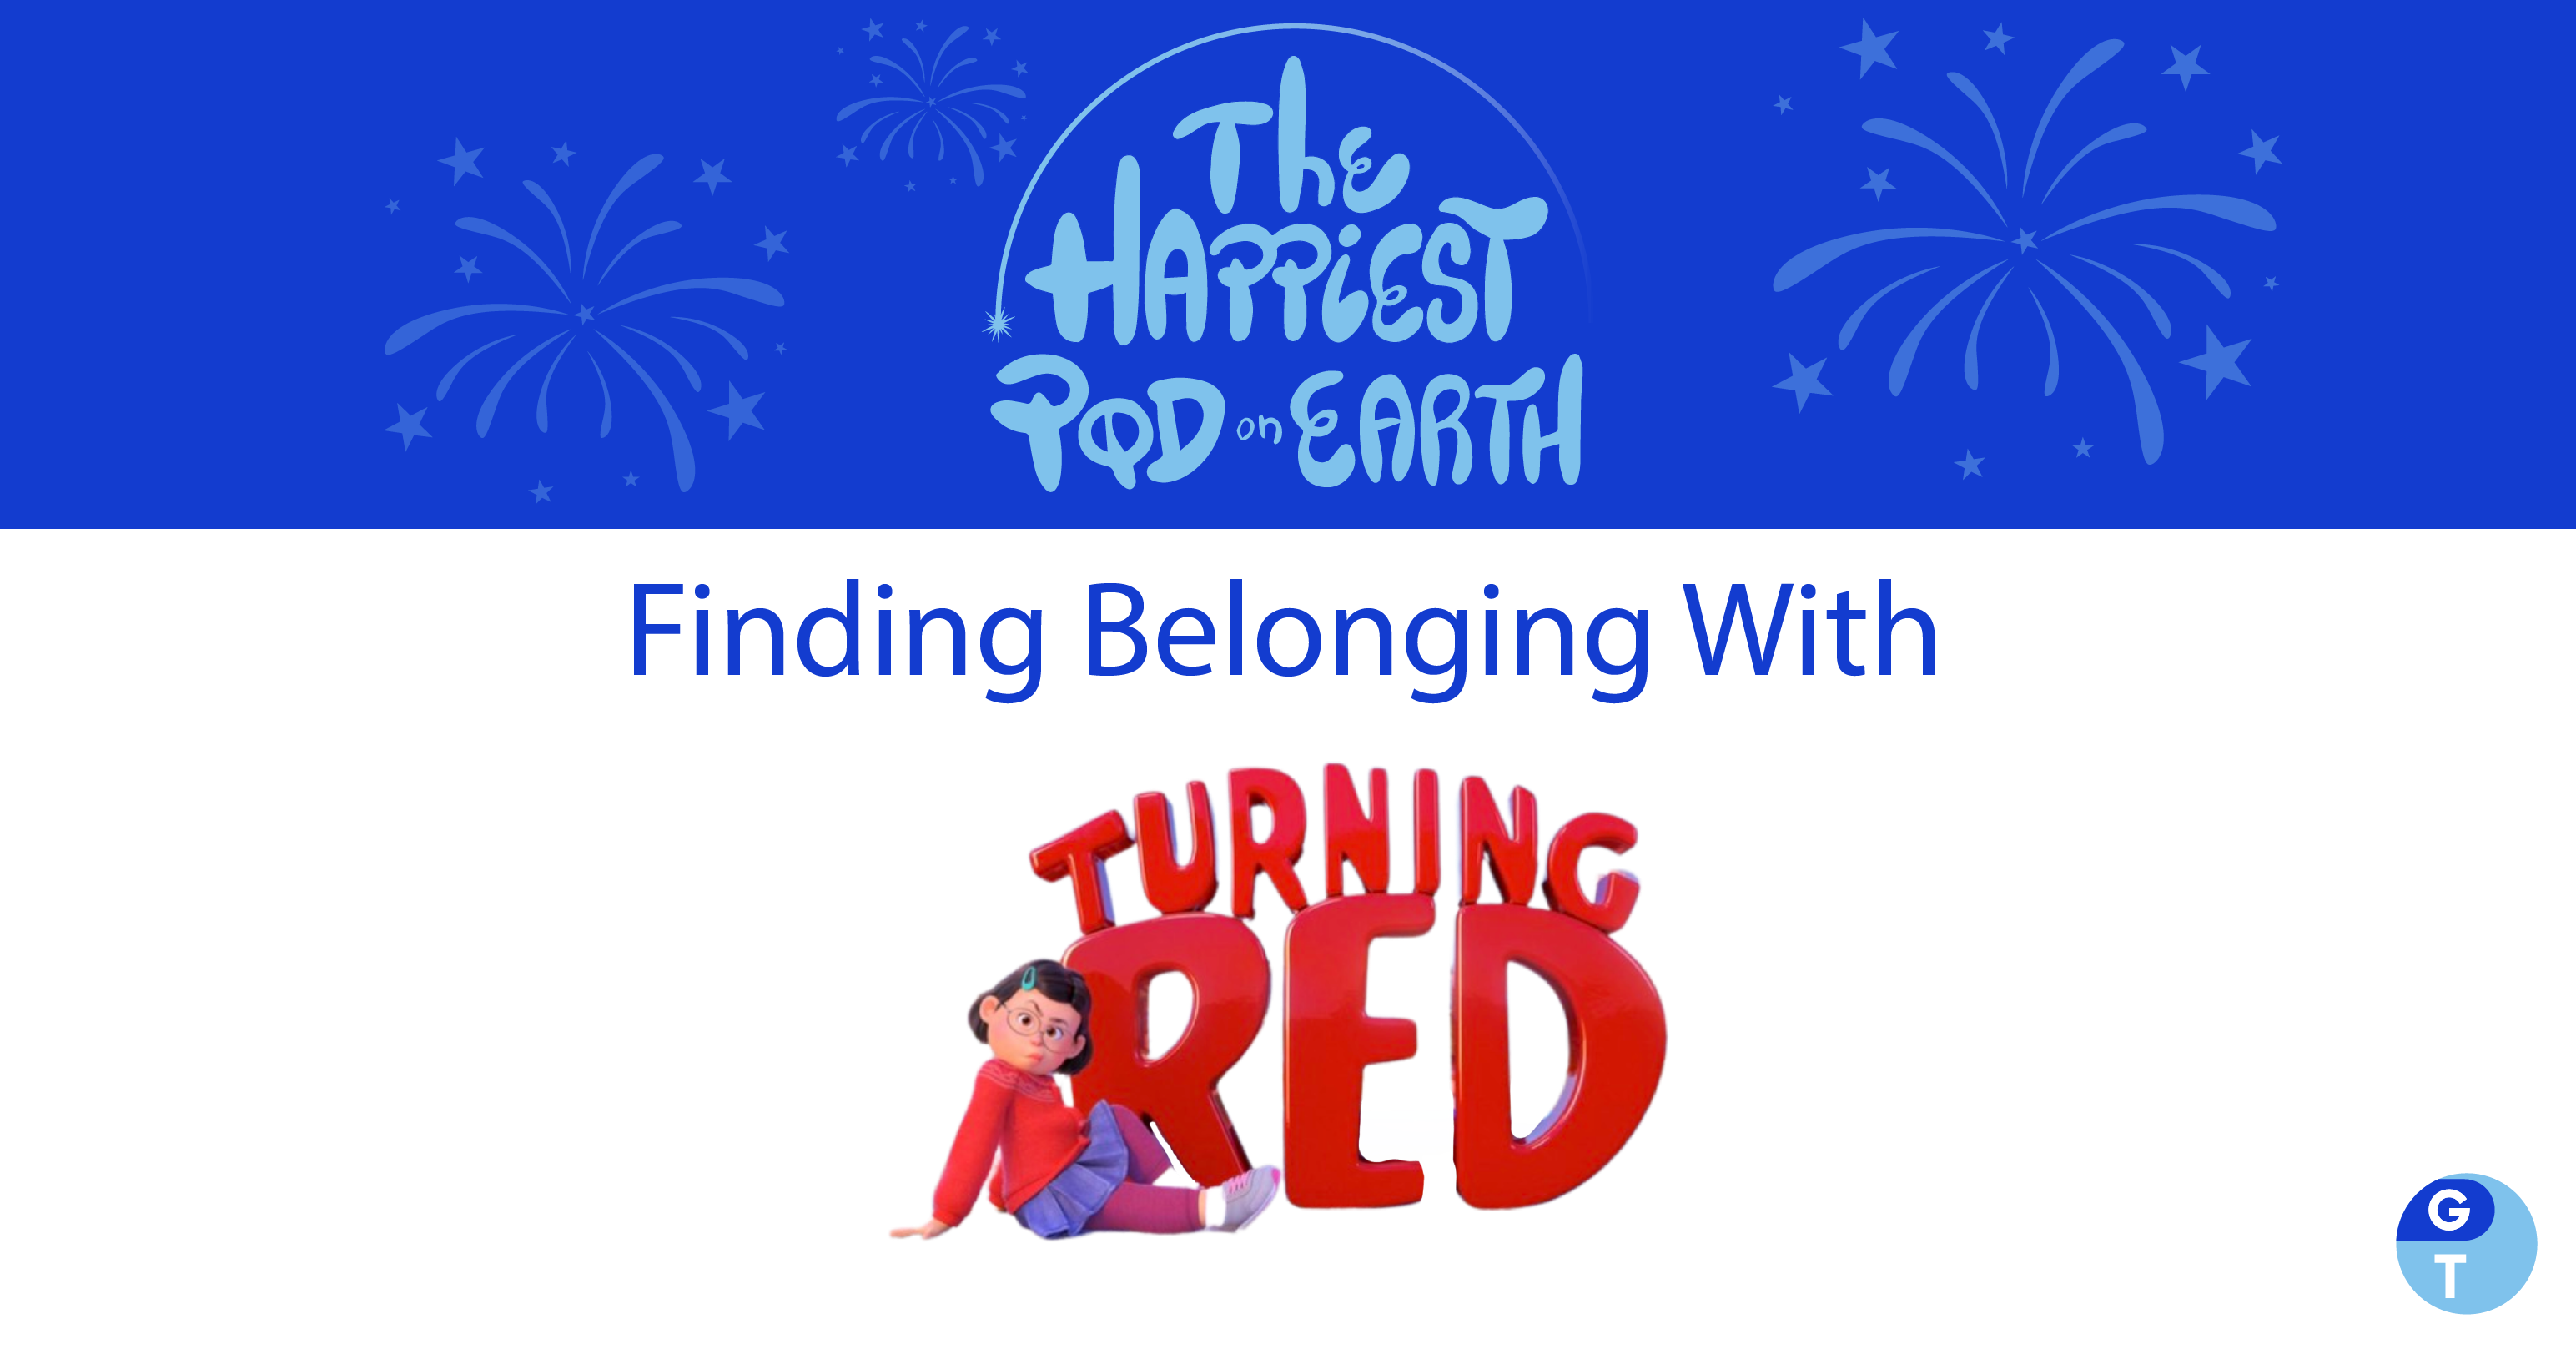 Podcast logo with fireworks and podcast episode name “Finding Belonging with Turning Red” with the character Mei Mei next to the title